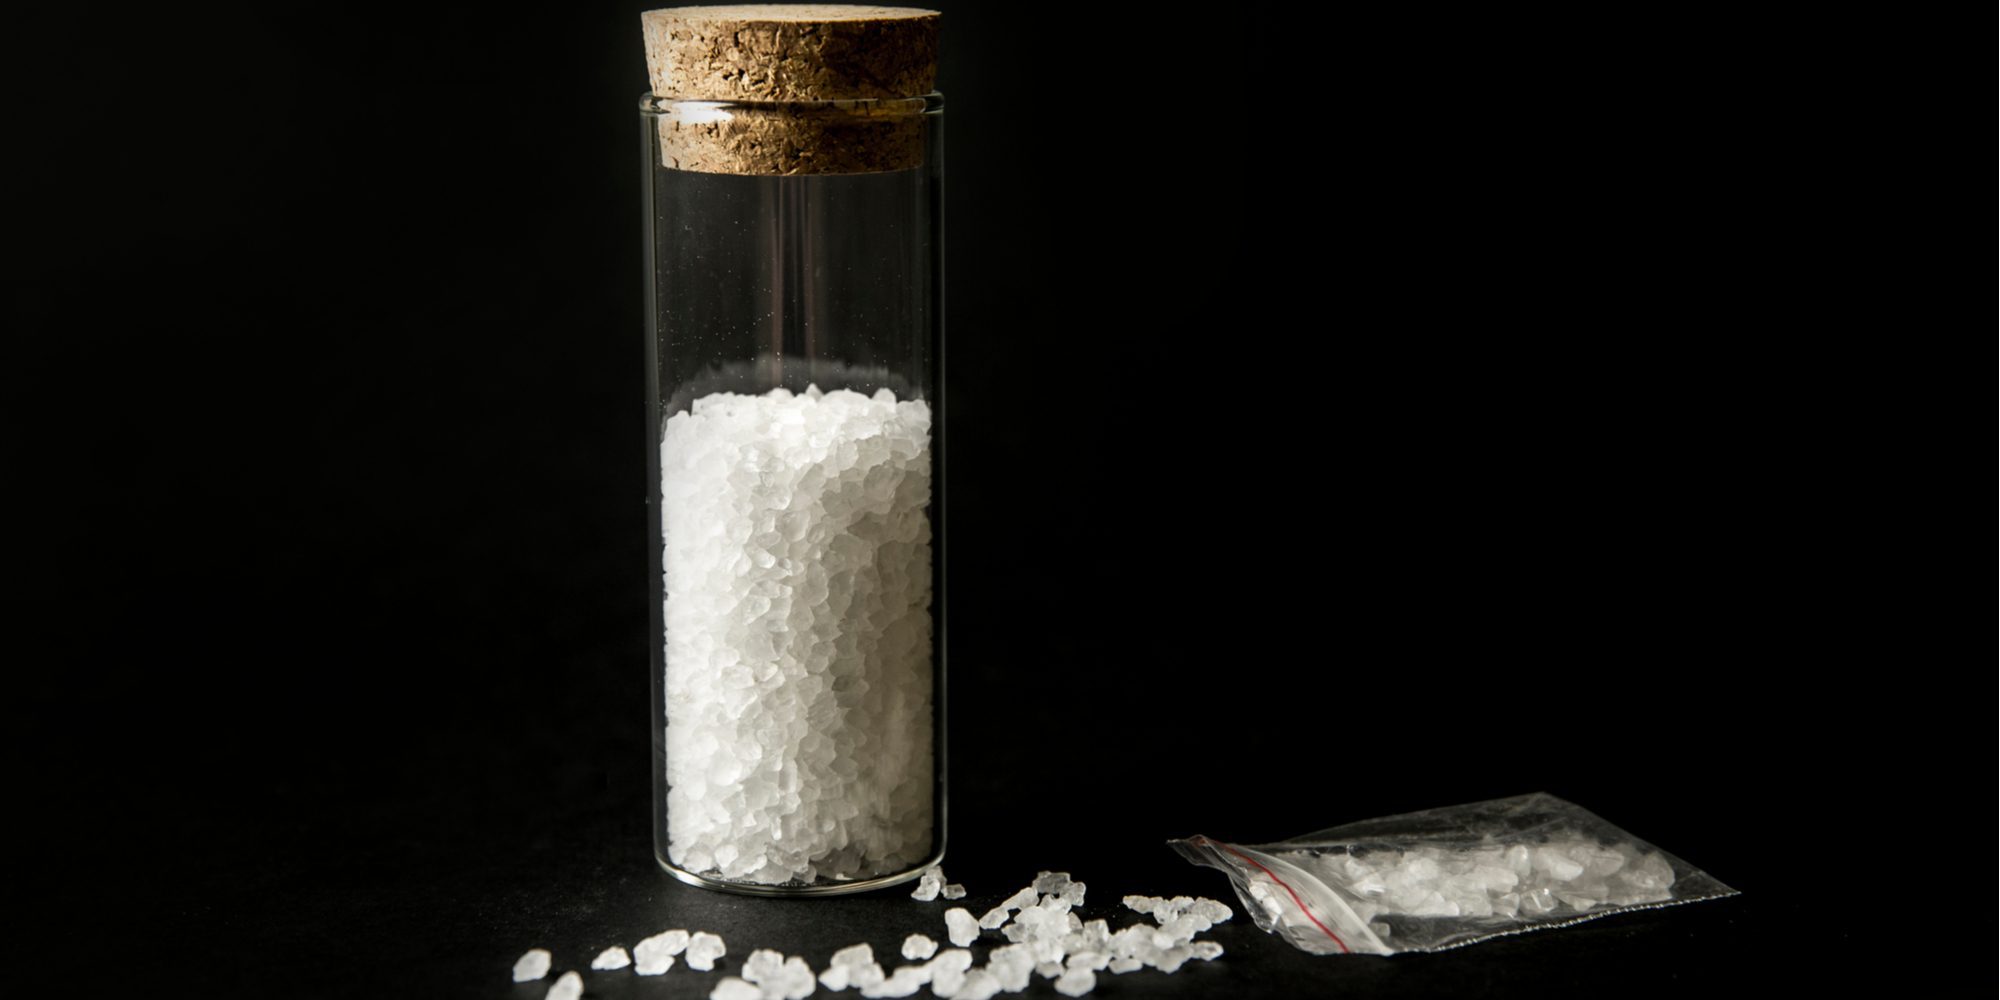 How Bath Salt Drug Abuse Leads to Addiction in FloridaThe effects of bath salts make them both highly desirable and very dangerous.